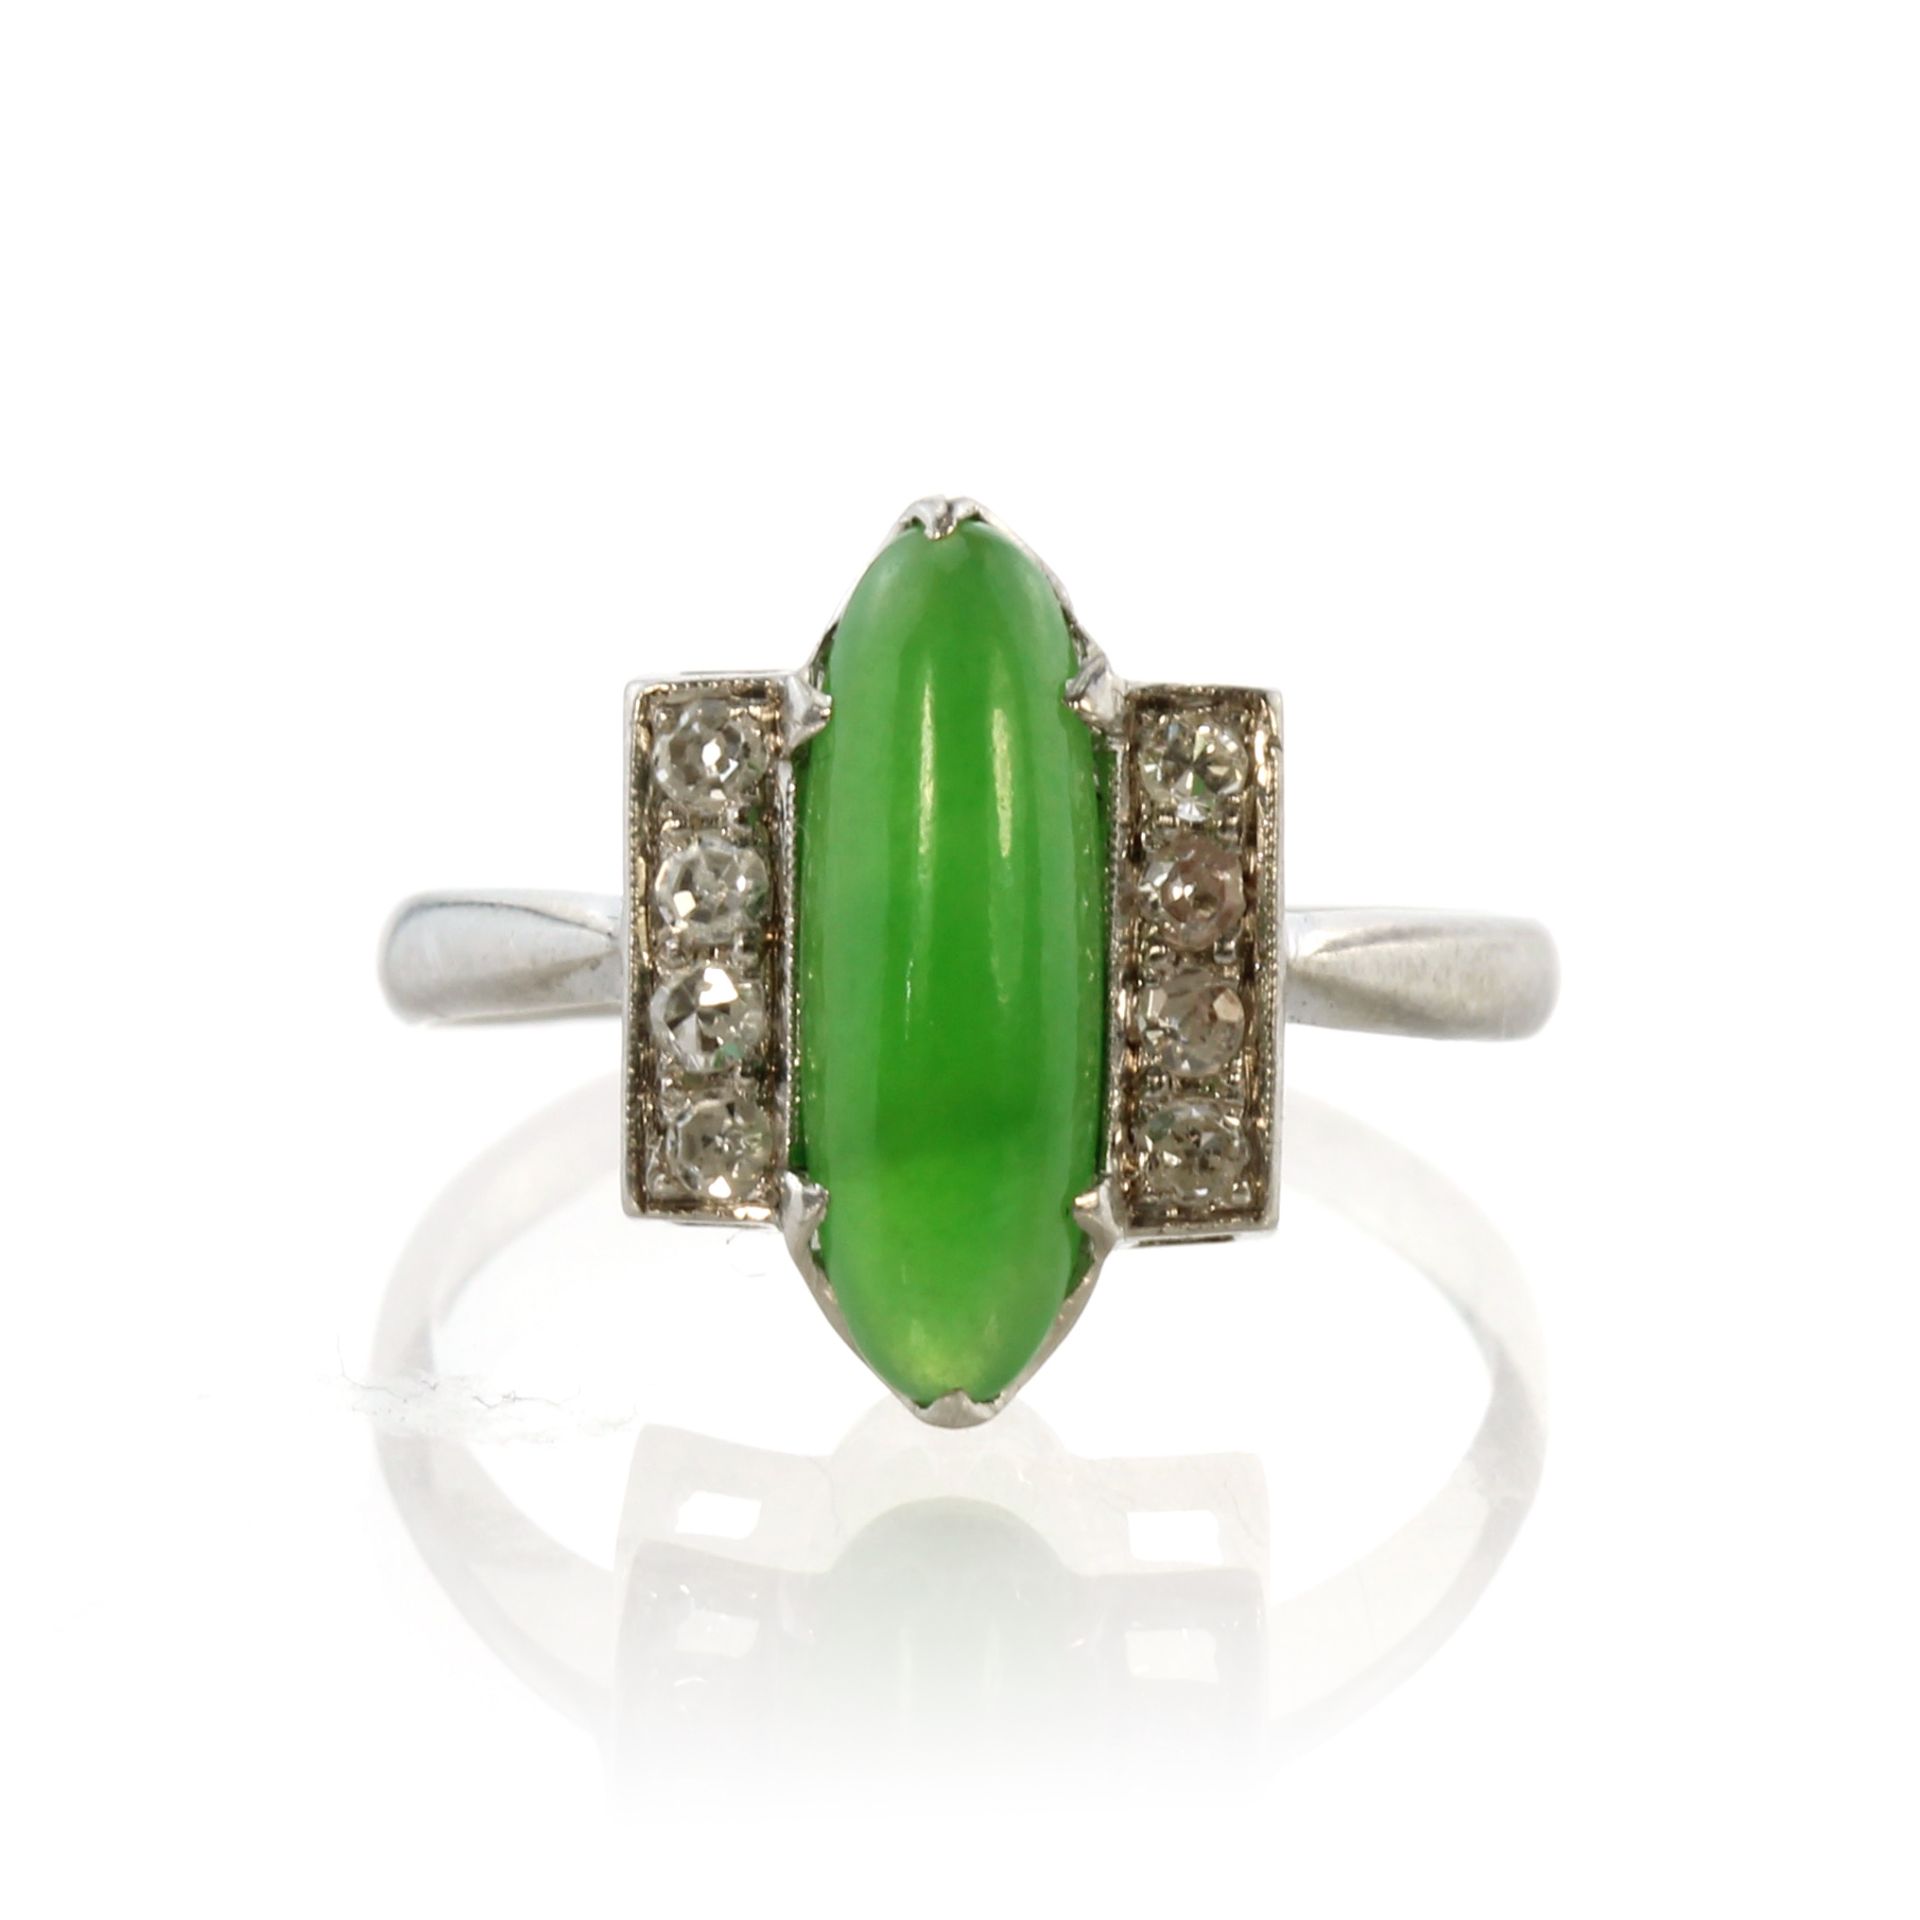 A jade and diamond dress ring in white gold or platinum set with a central elongated oval cabochon